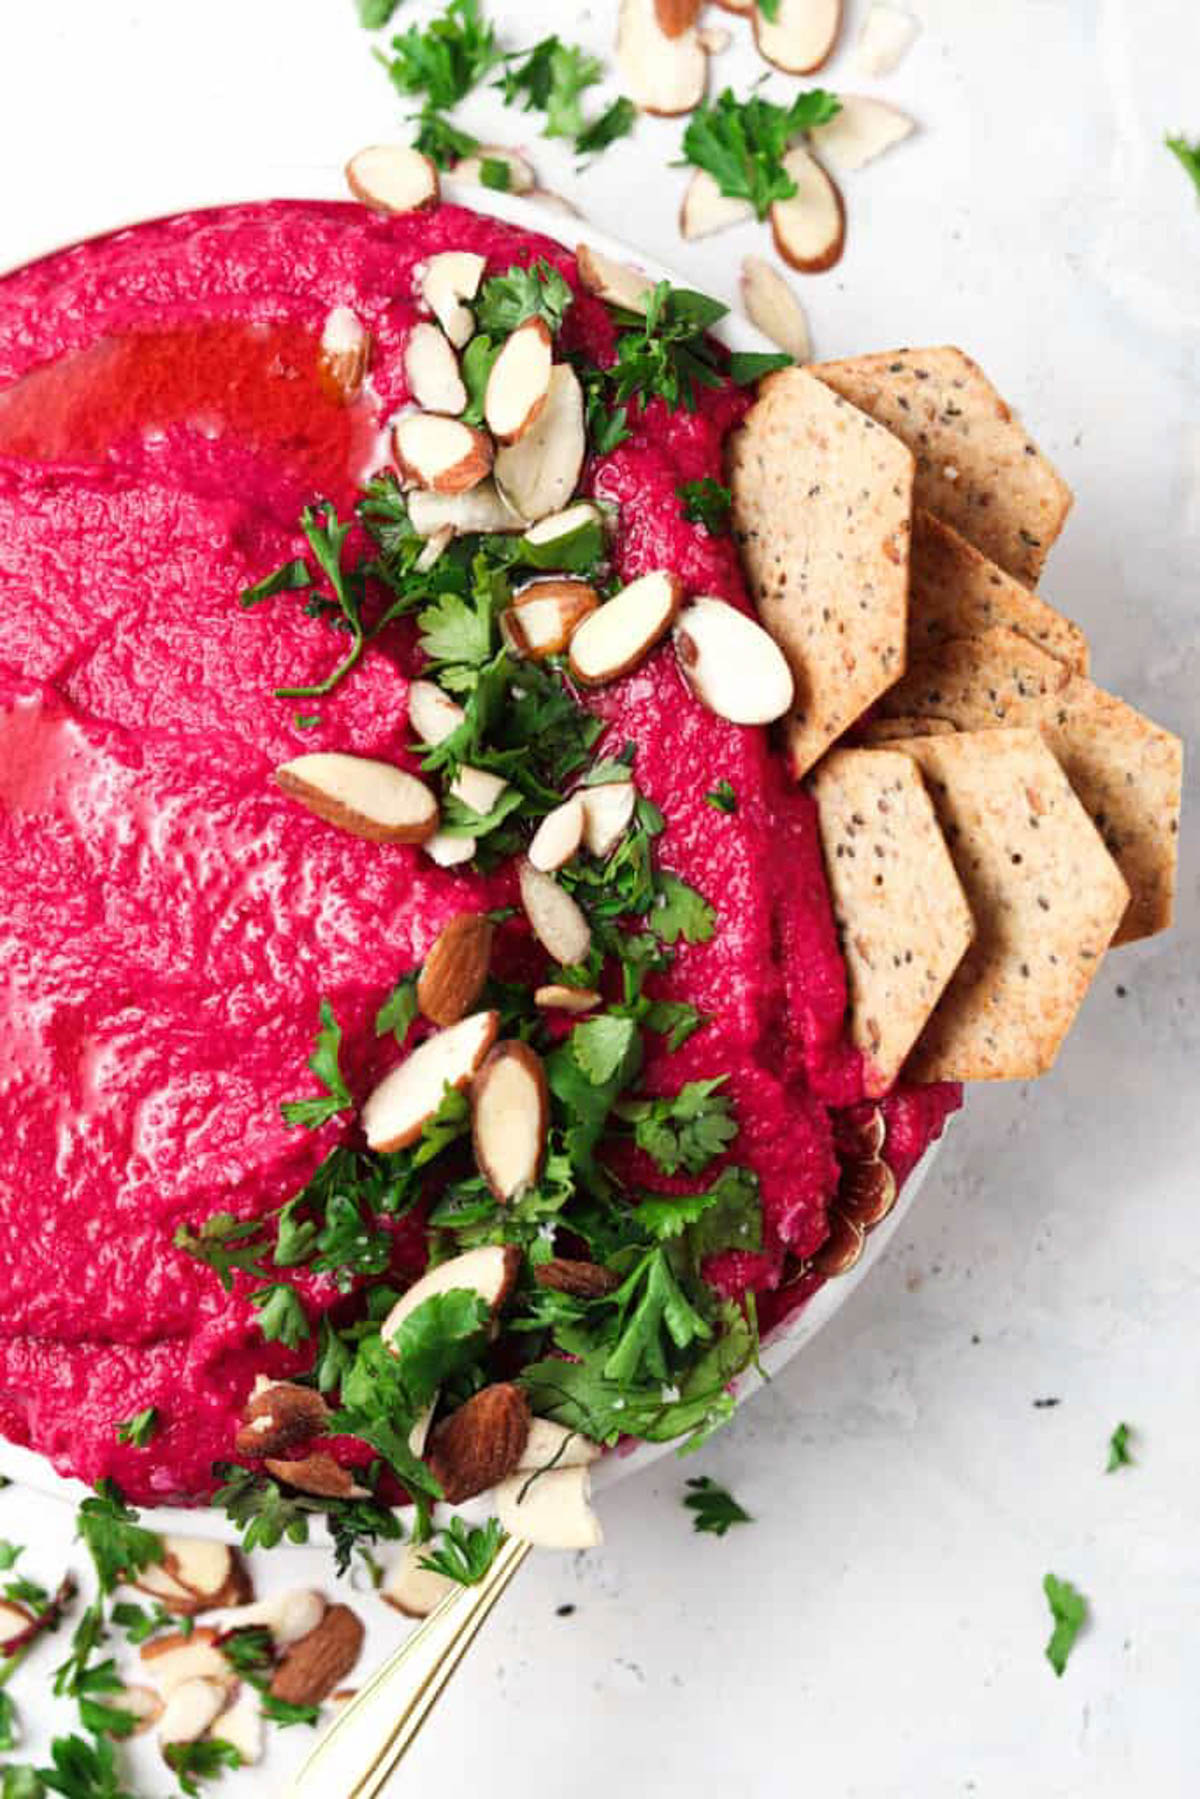 Paleo beet hummus with crackers, almond slivers, and parsley.